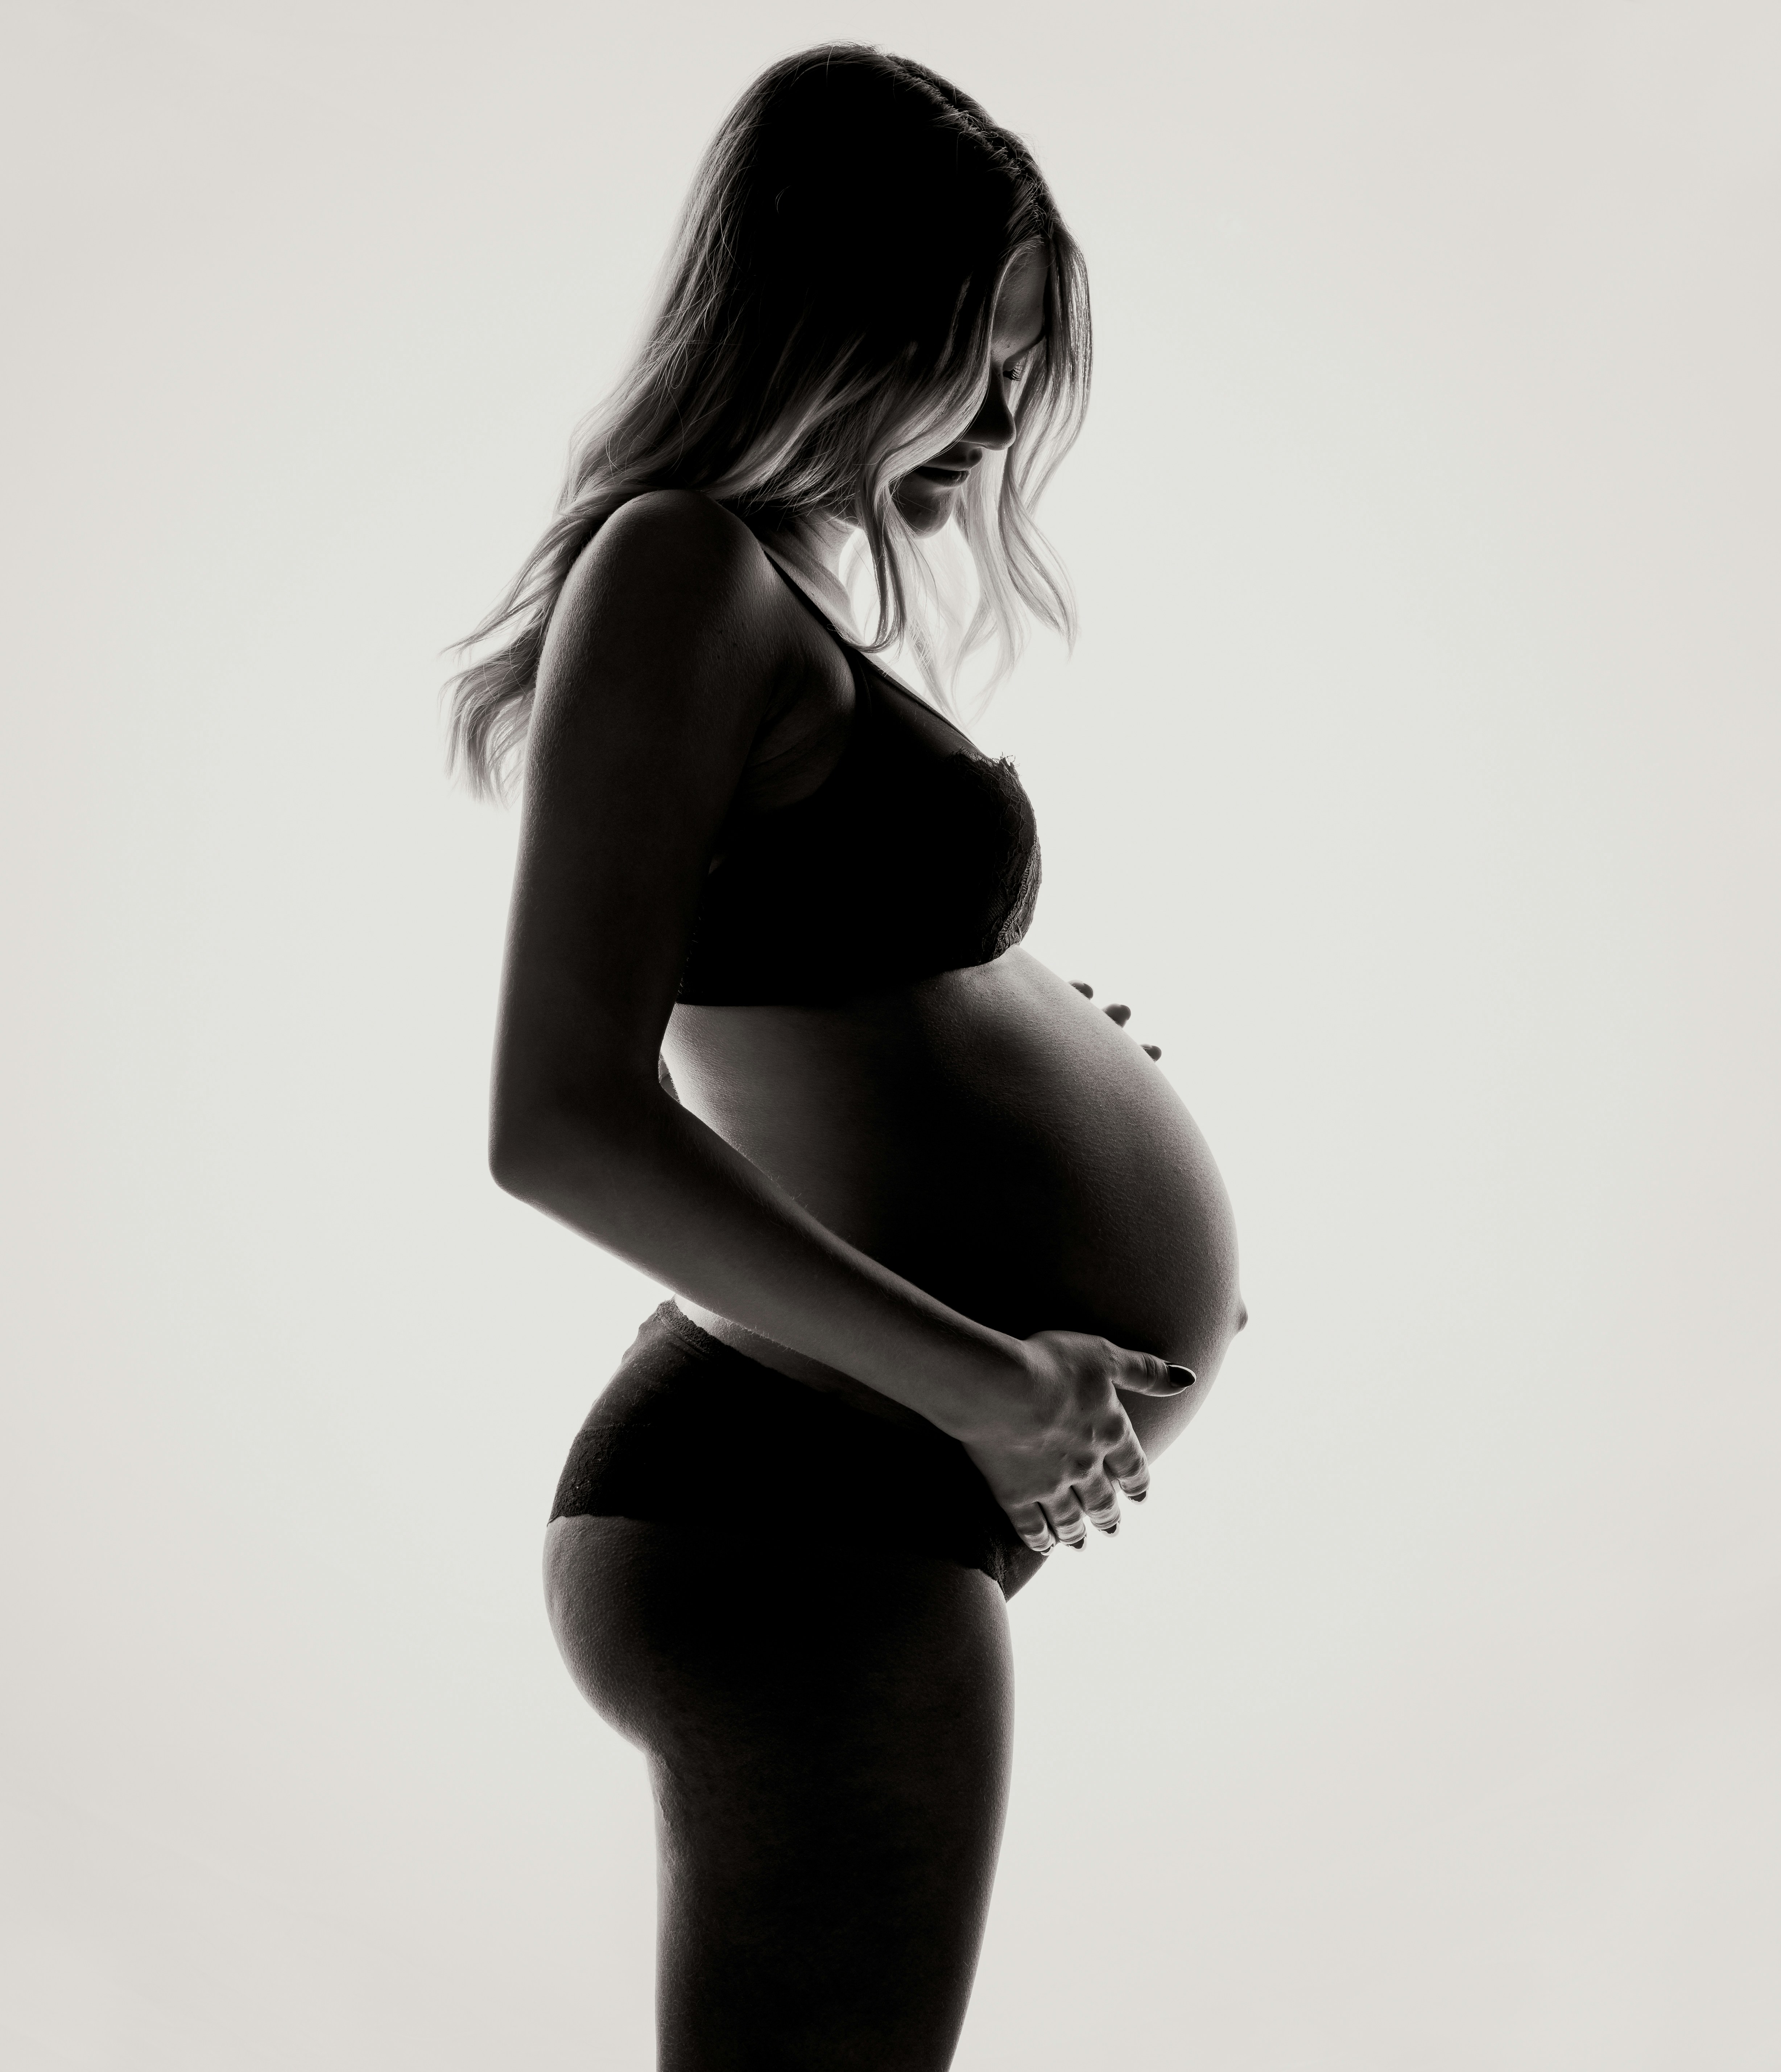 500+ Pregnant Belly Pictures Download Free Images on Unsplash pic